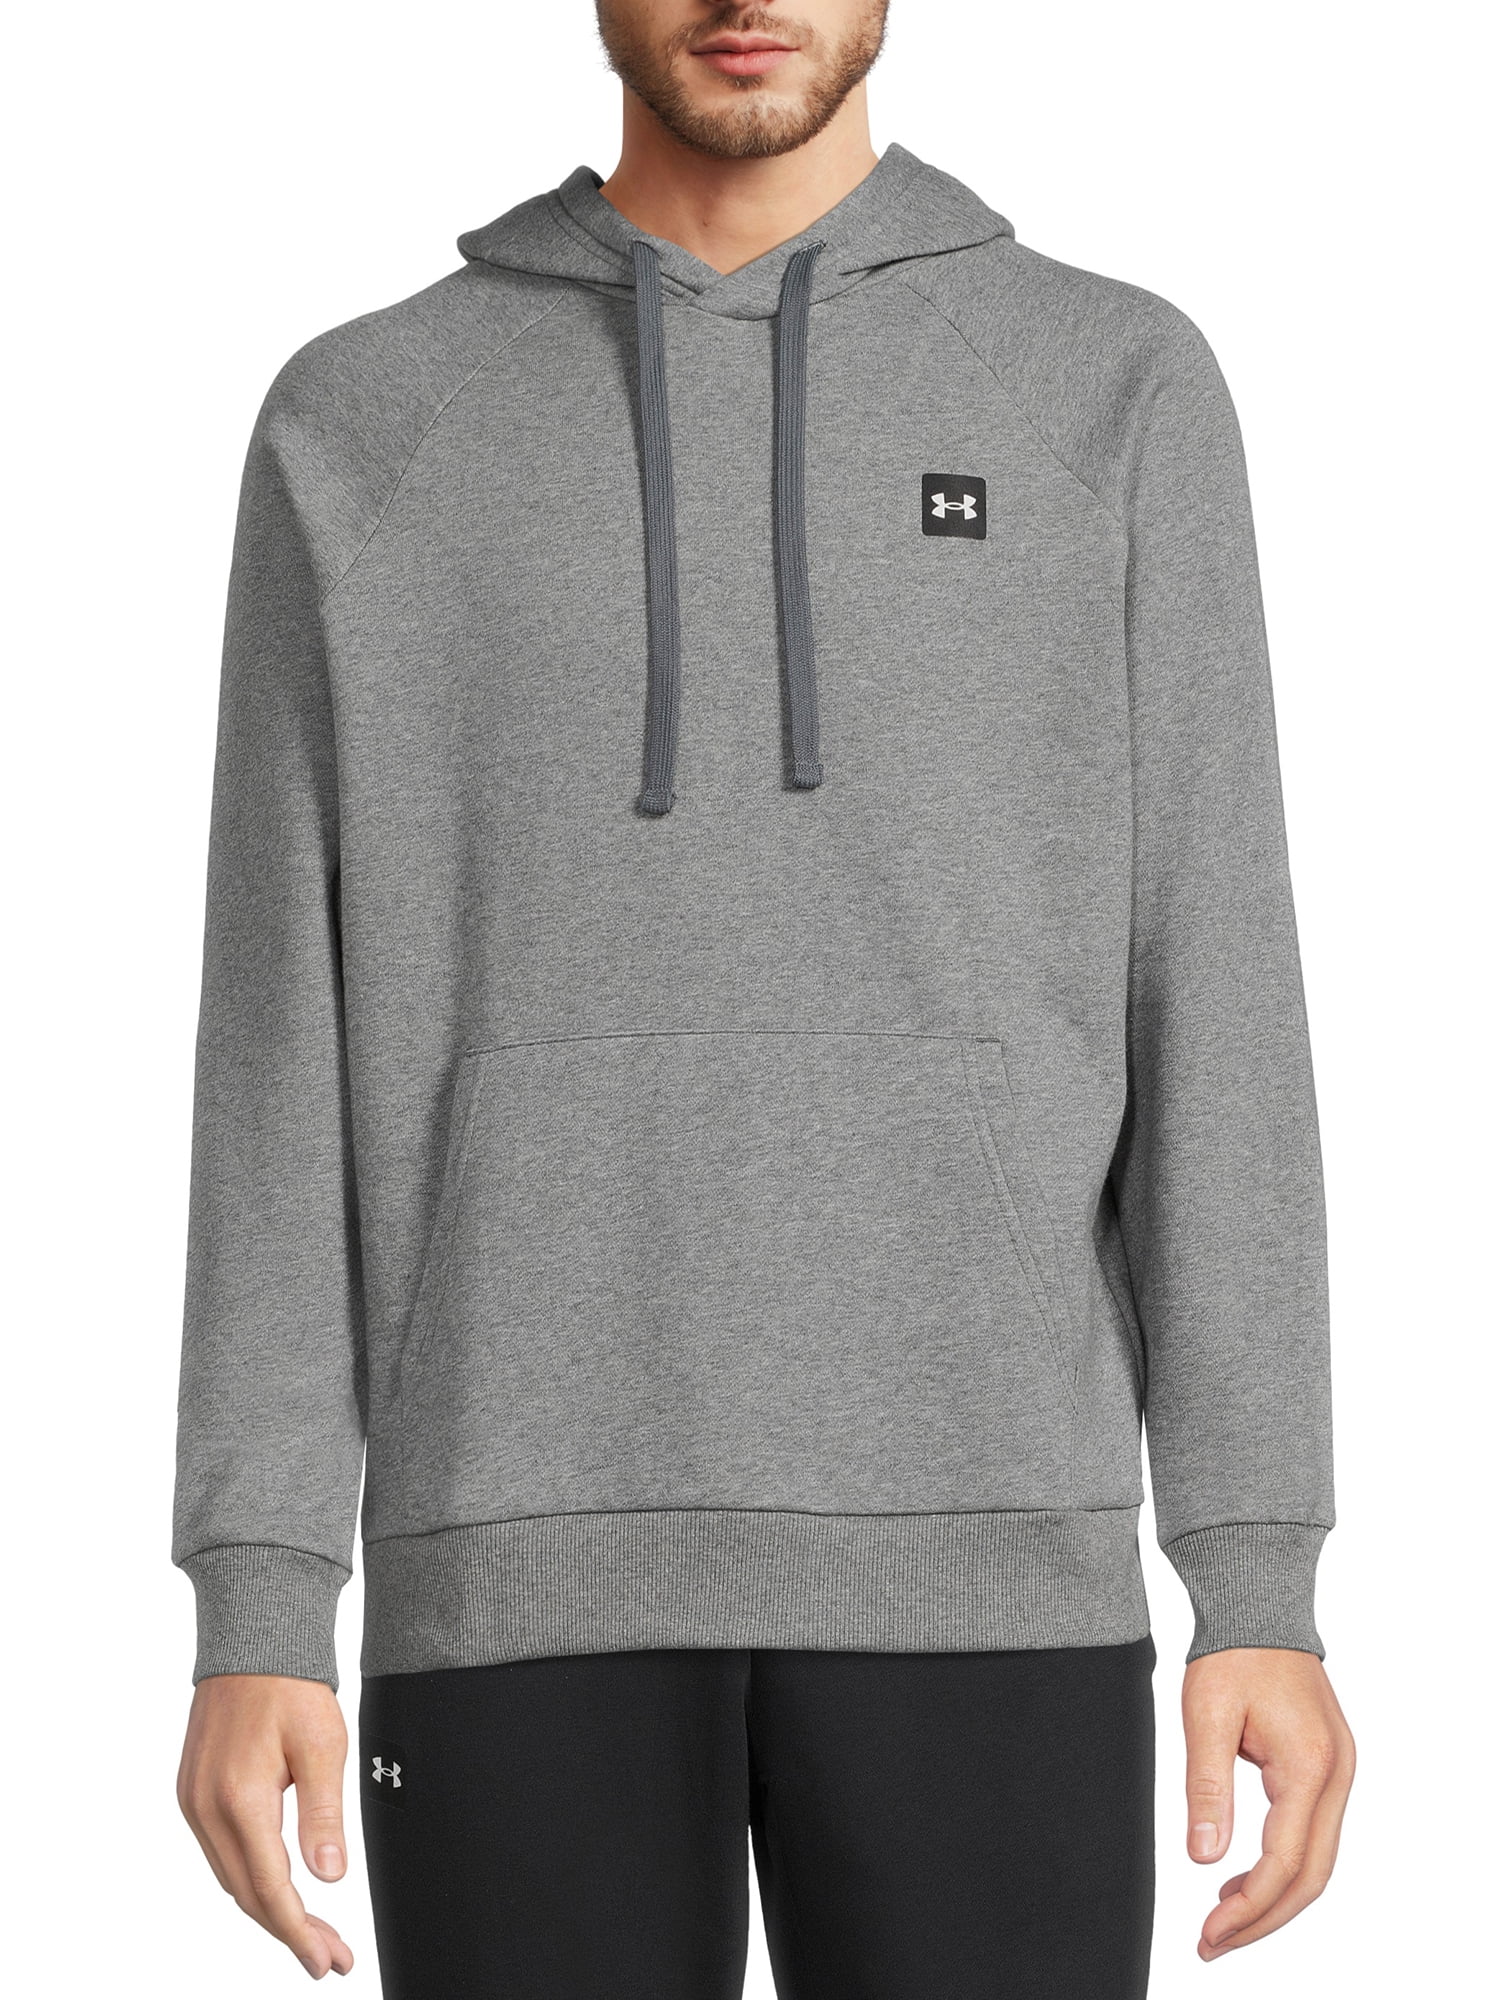 Under Armour Men's and Big Men's UA Rival Fleece Hoodie, Sizes up to 2XL